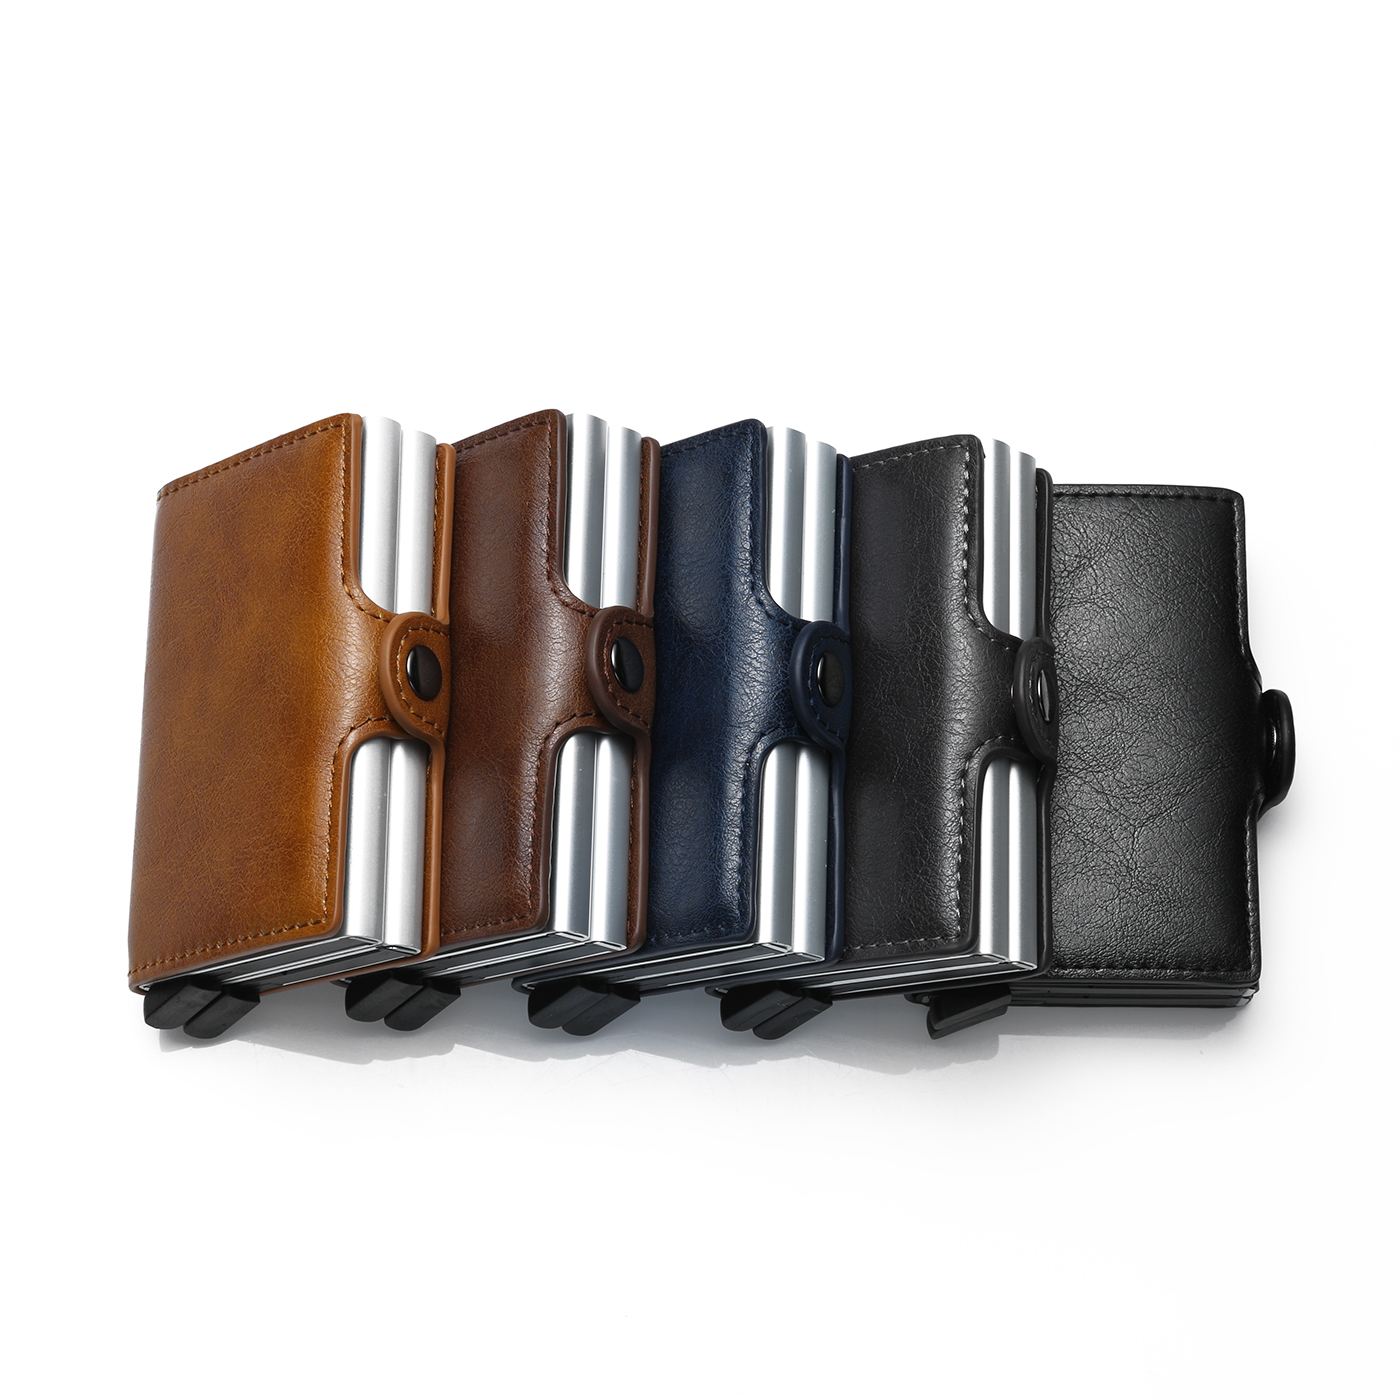 2020 Trendy Colorful Luxury Genuine Leather Automatic Pop-up Stainless Steel Card Holder Wallet